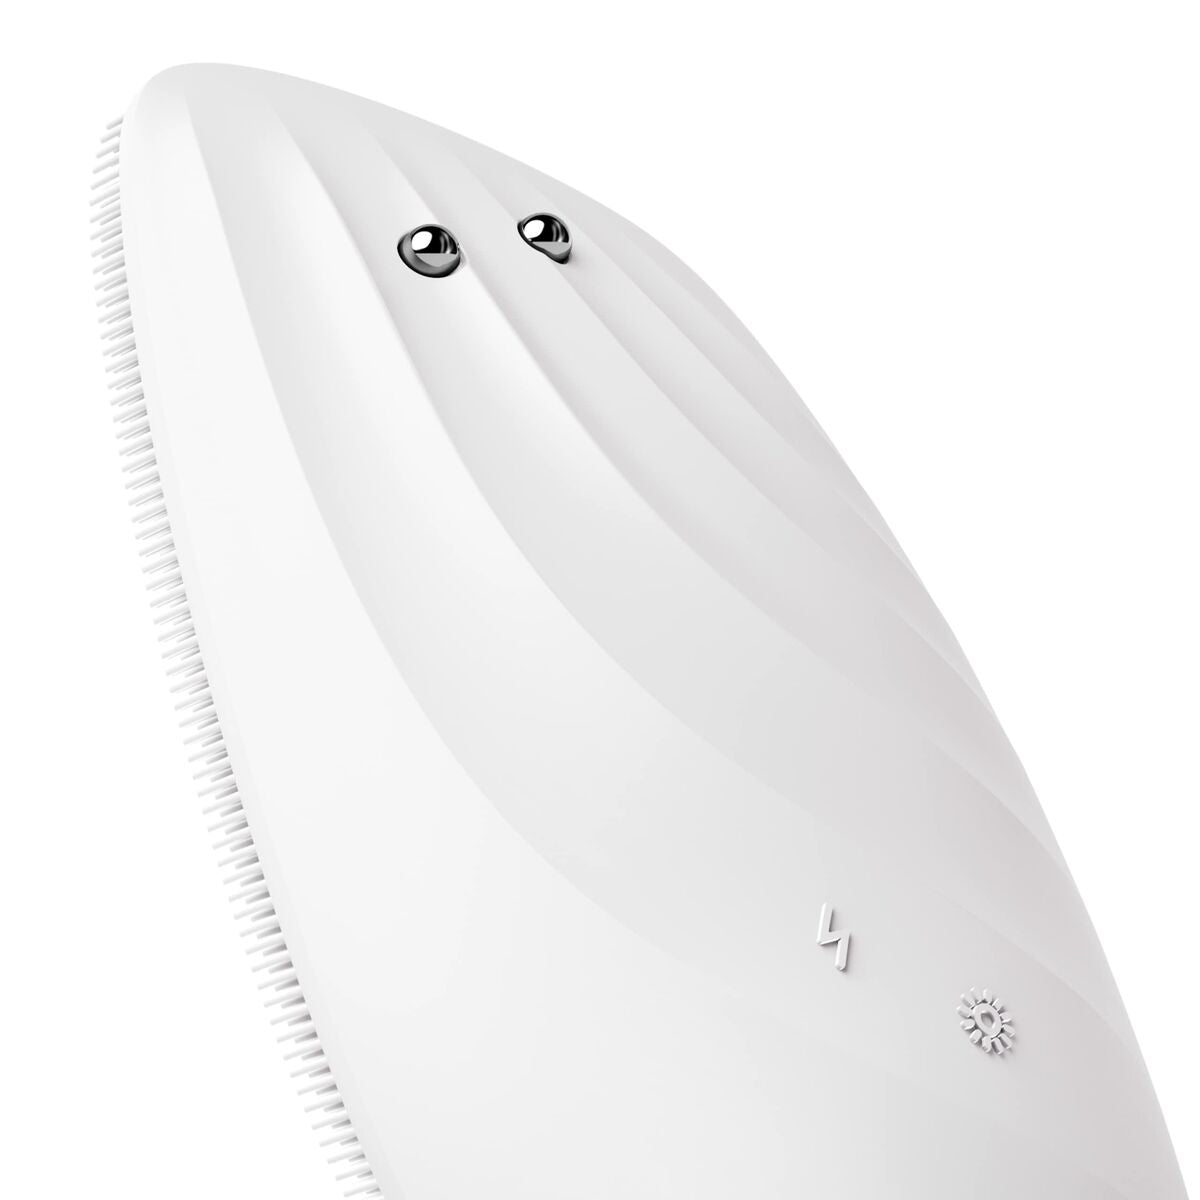 Cleansing Facial Brush Geske SmartAppGuided White 8-in-1